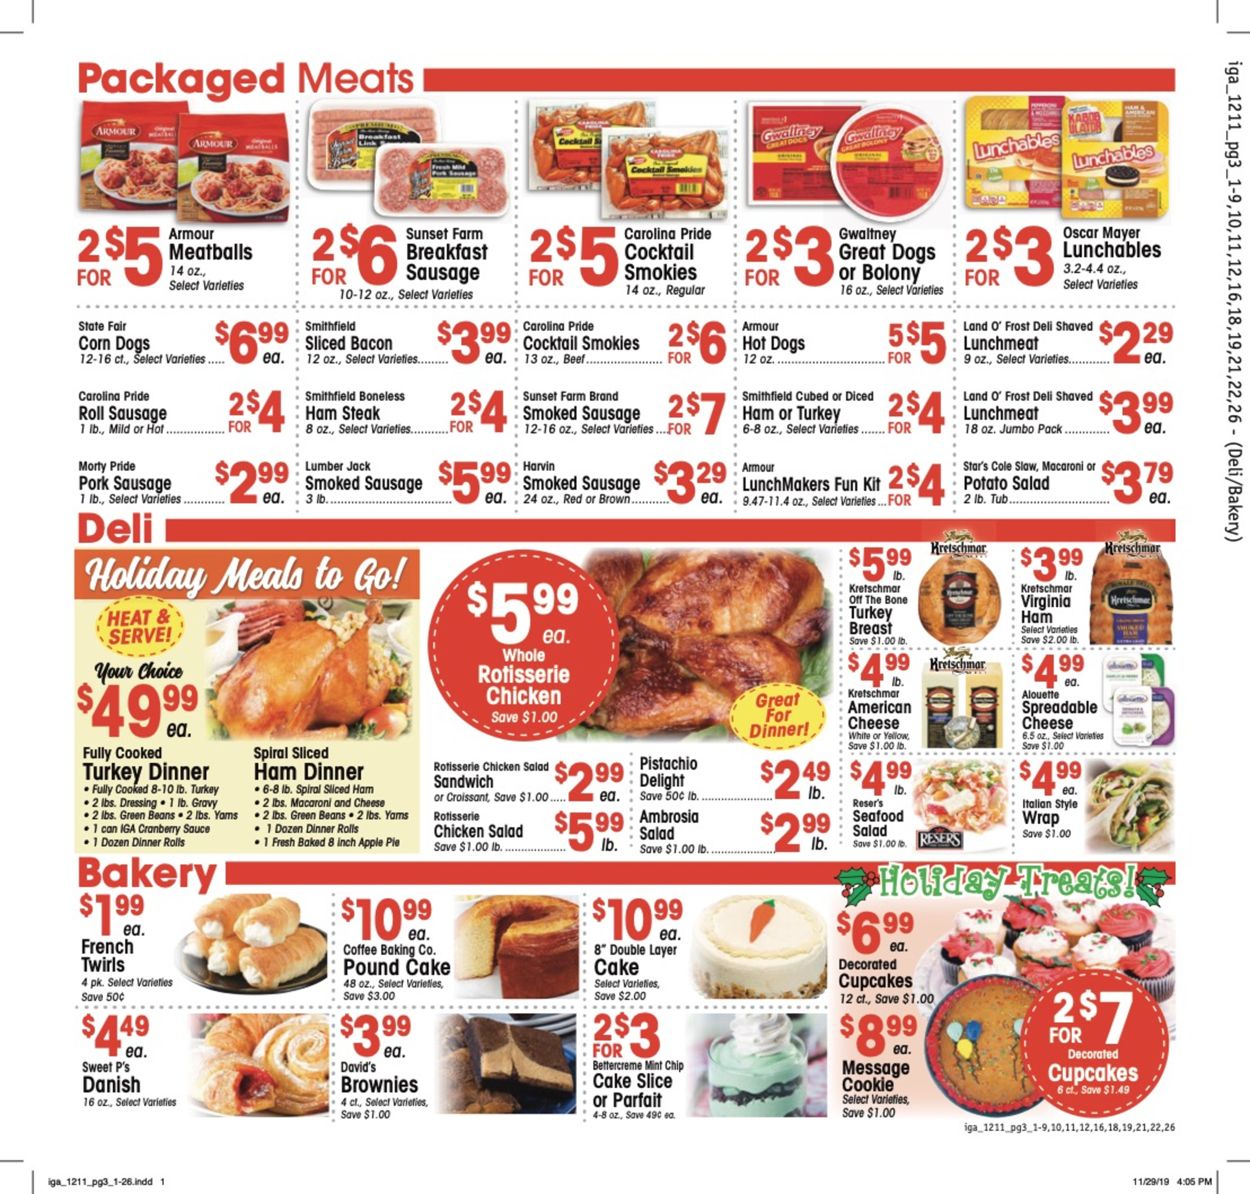 KJ´s Market Current weekly ad 12/11 - 12/17/2019 [3 ...